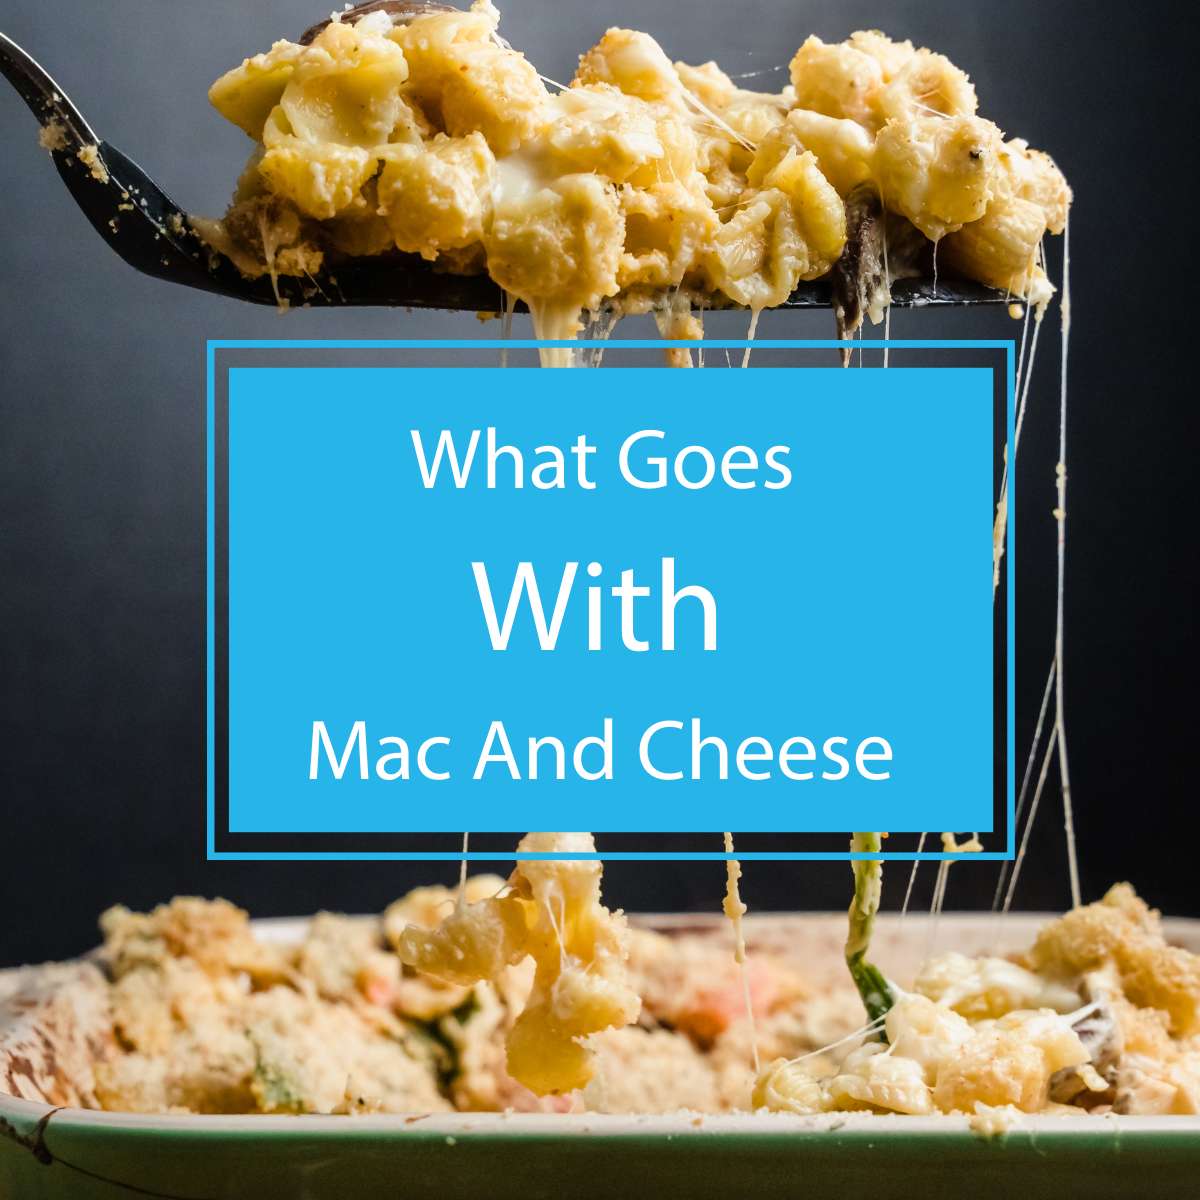 What Goes With Mac And Cheese